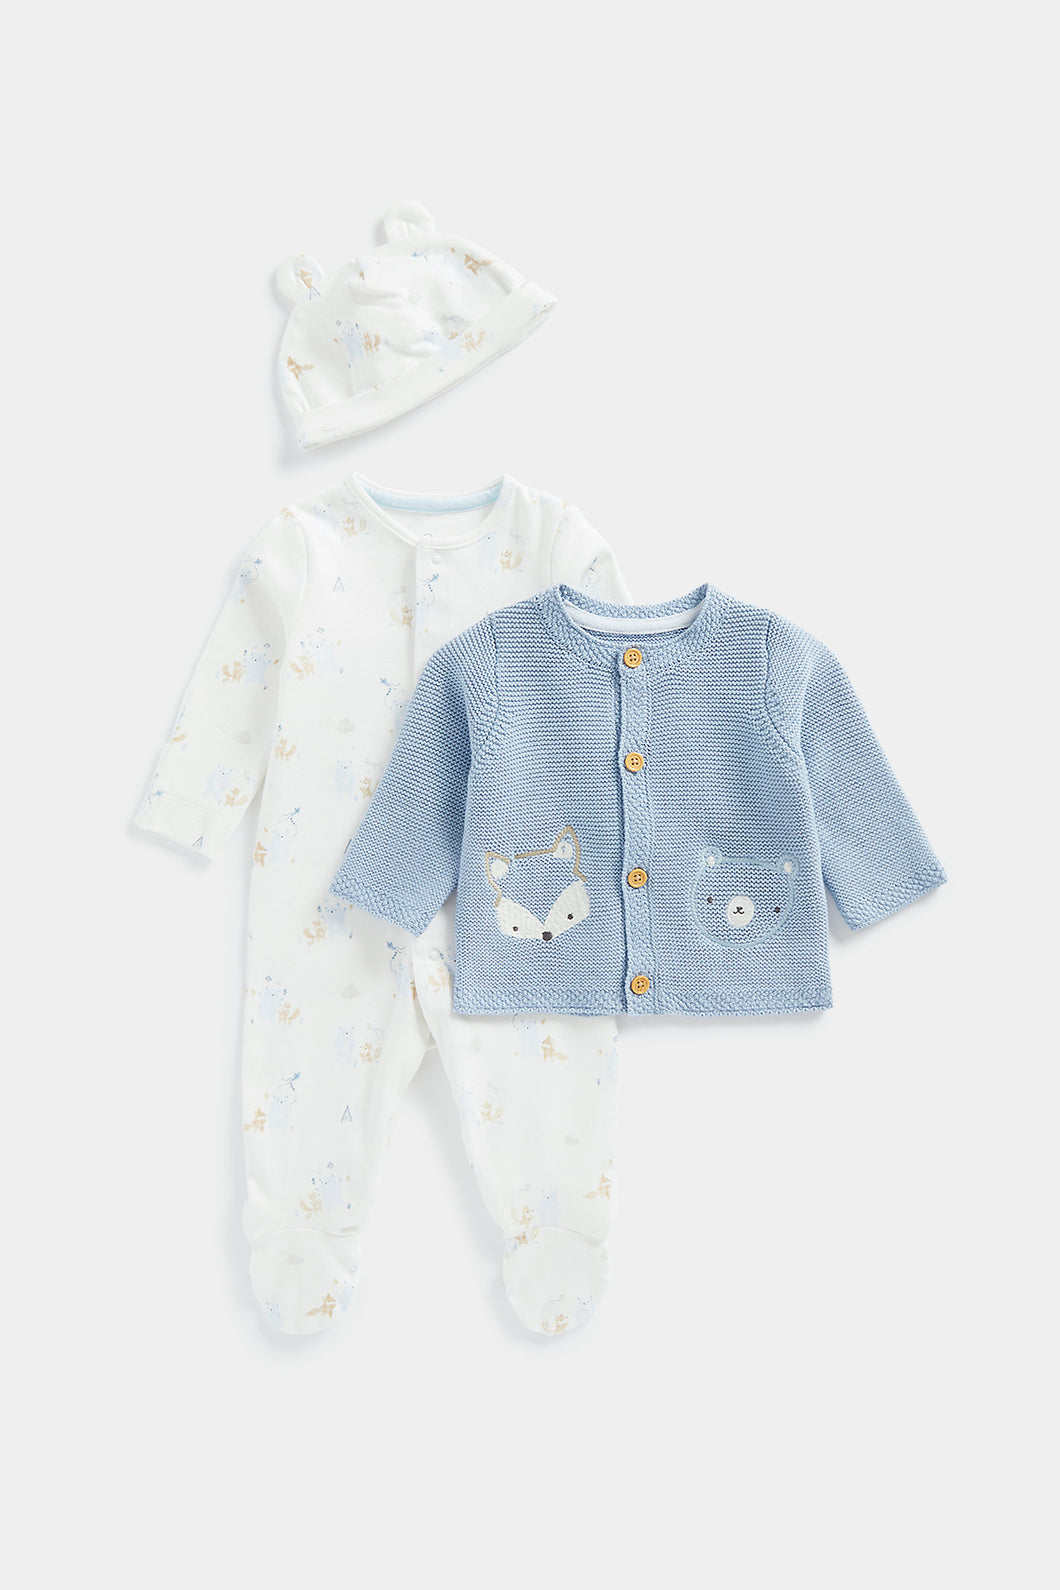 Mothercare My First 3-Piece Baby Outfit Set